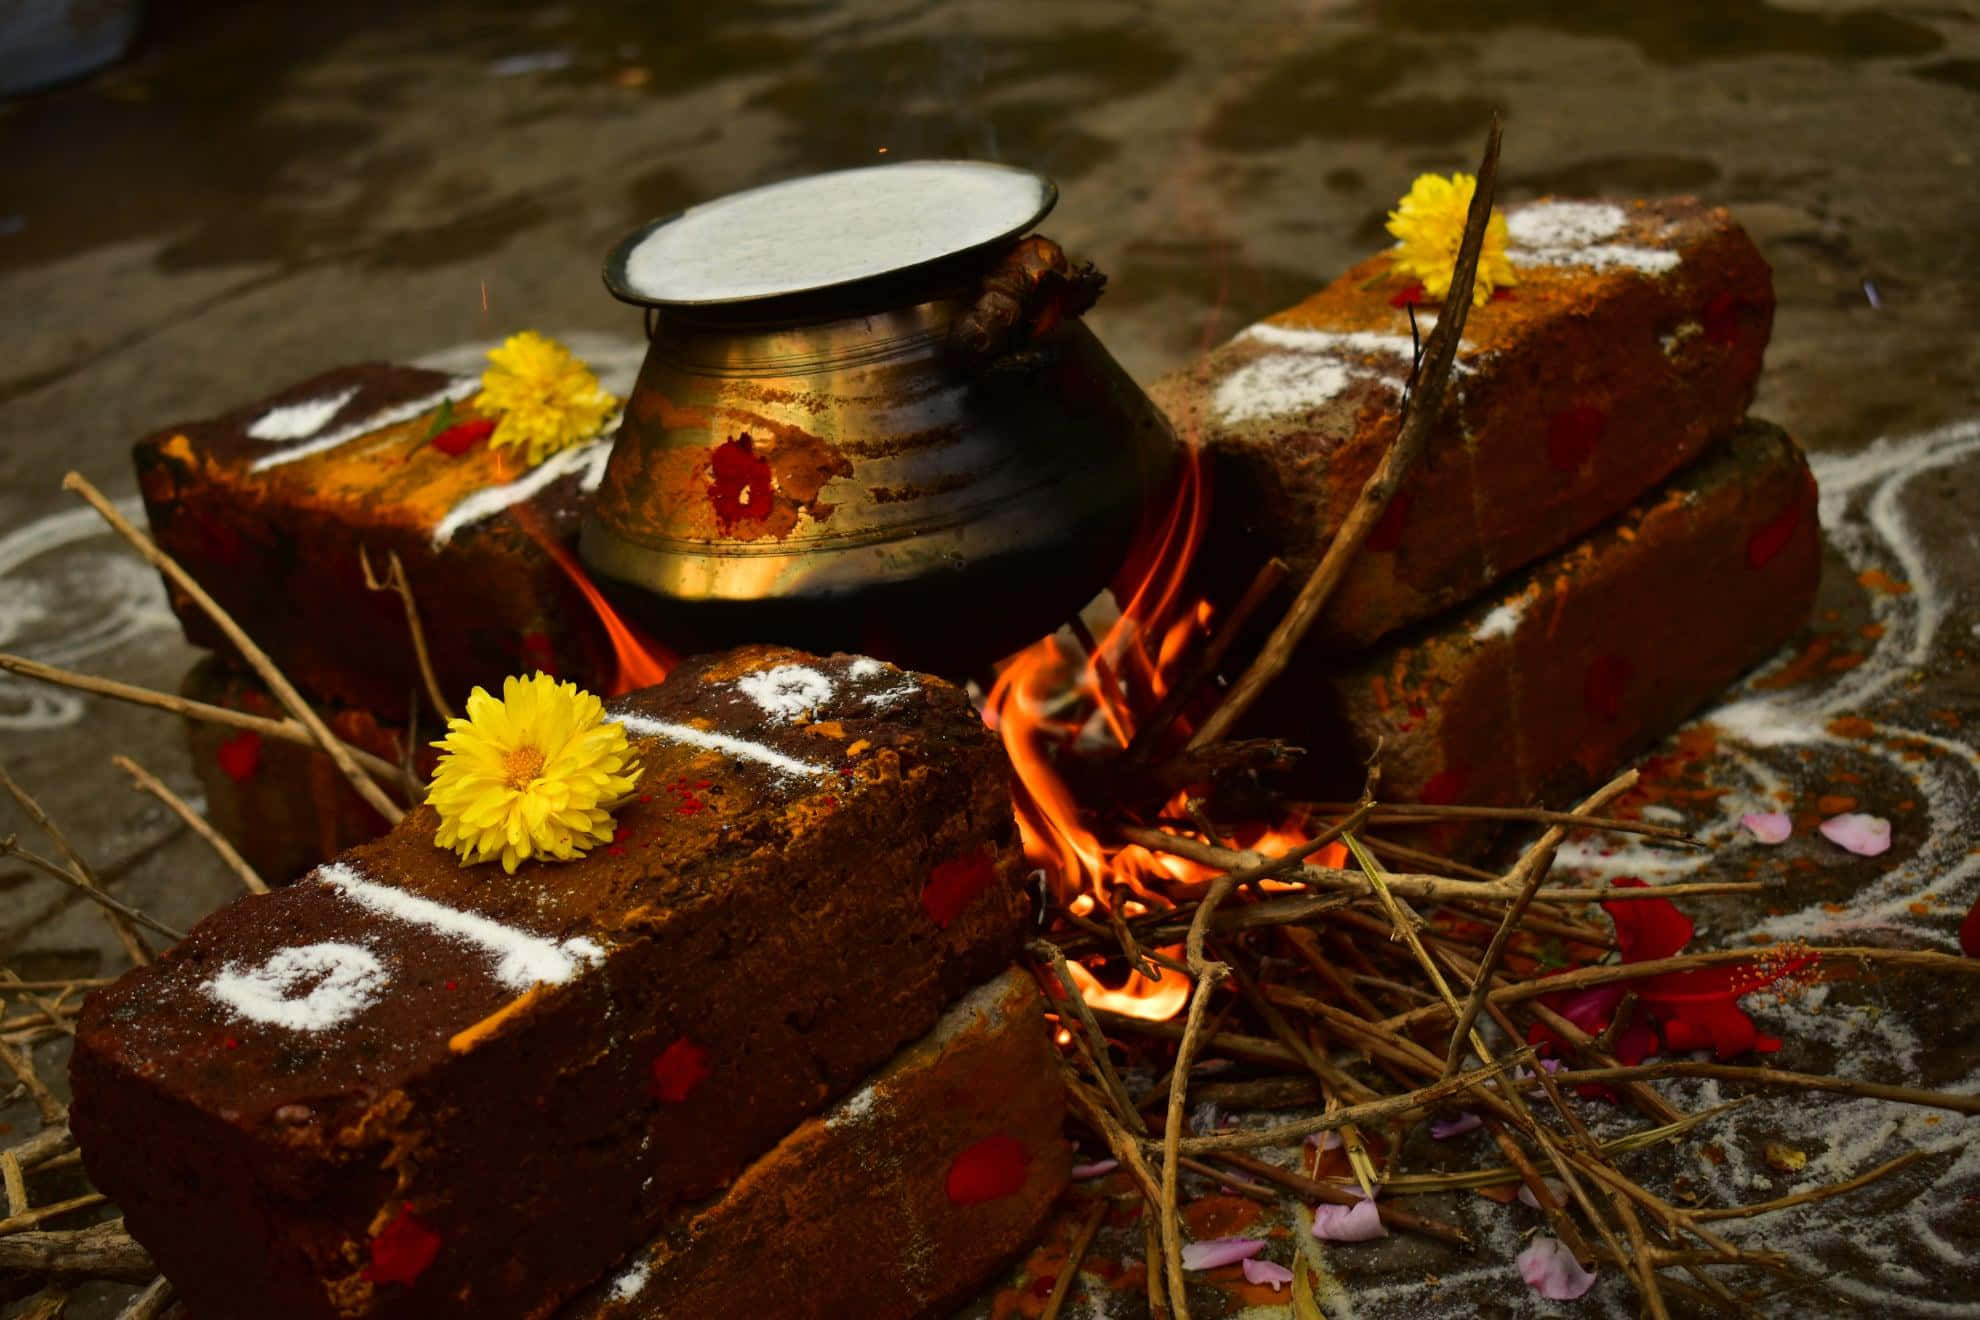 Joyous celebrations of Pongal festival with traditional pot, decorations, and harvest